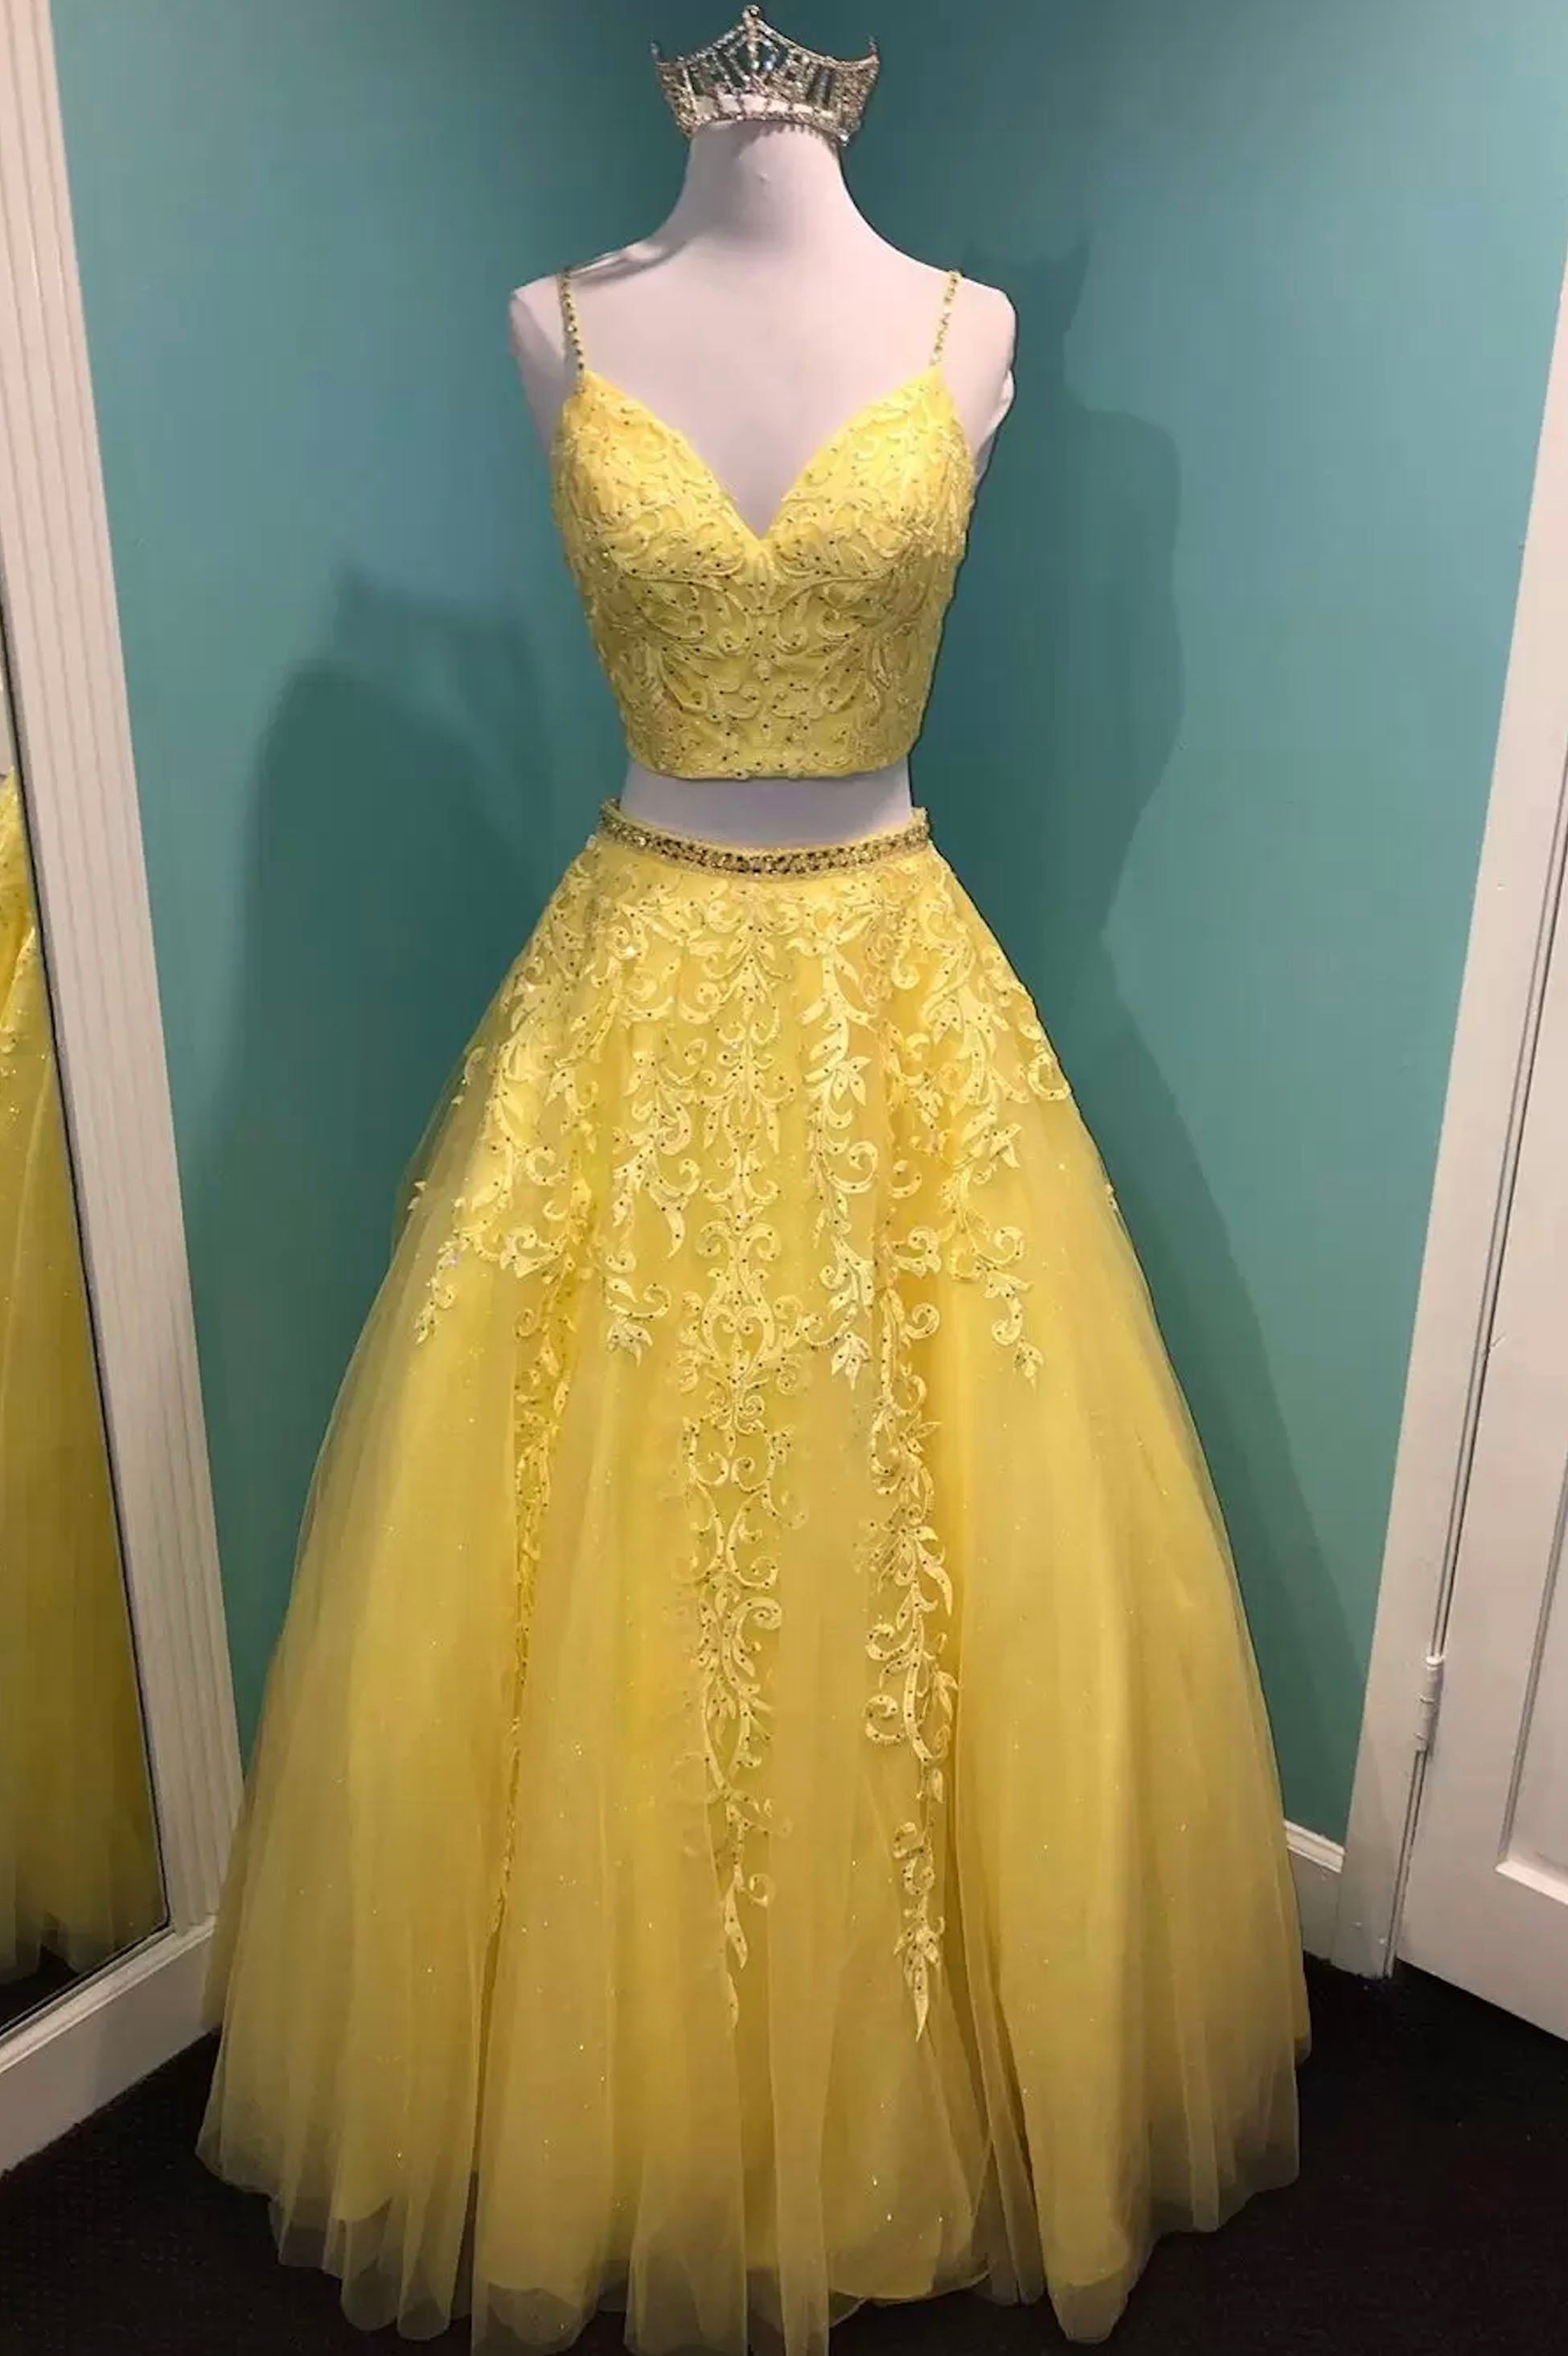 Yellow V-Neck Lace Long Corset Prom Dress, Two Pieces Evening Graduation Dress outfits, Formal Dress With Embroidered Flowers